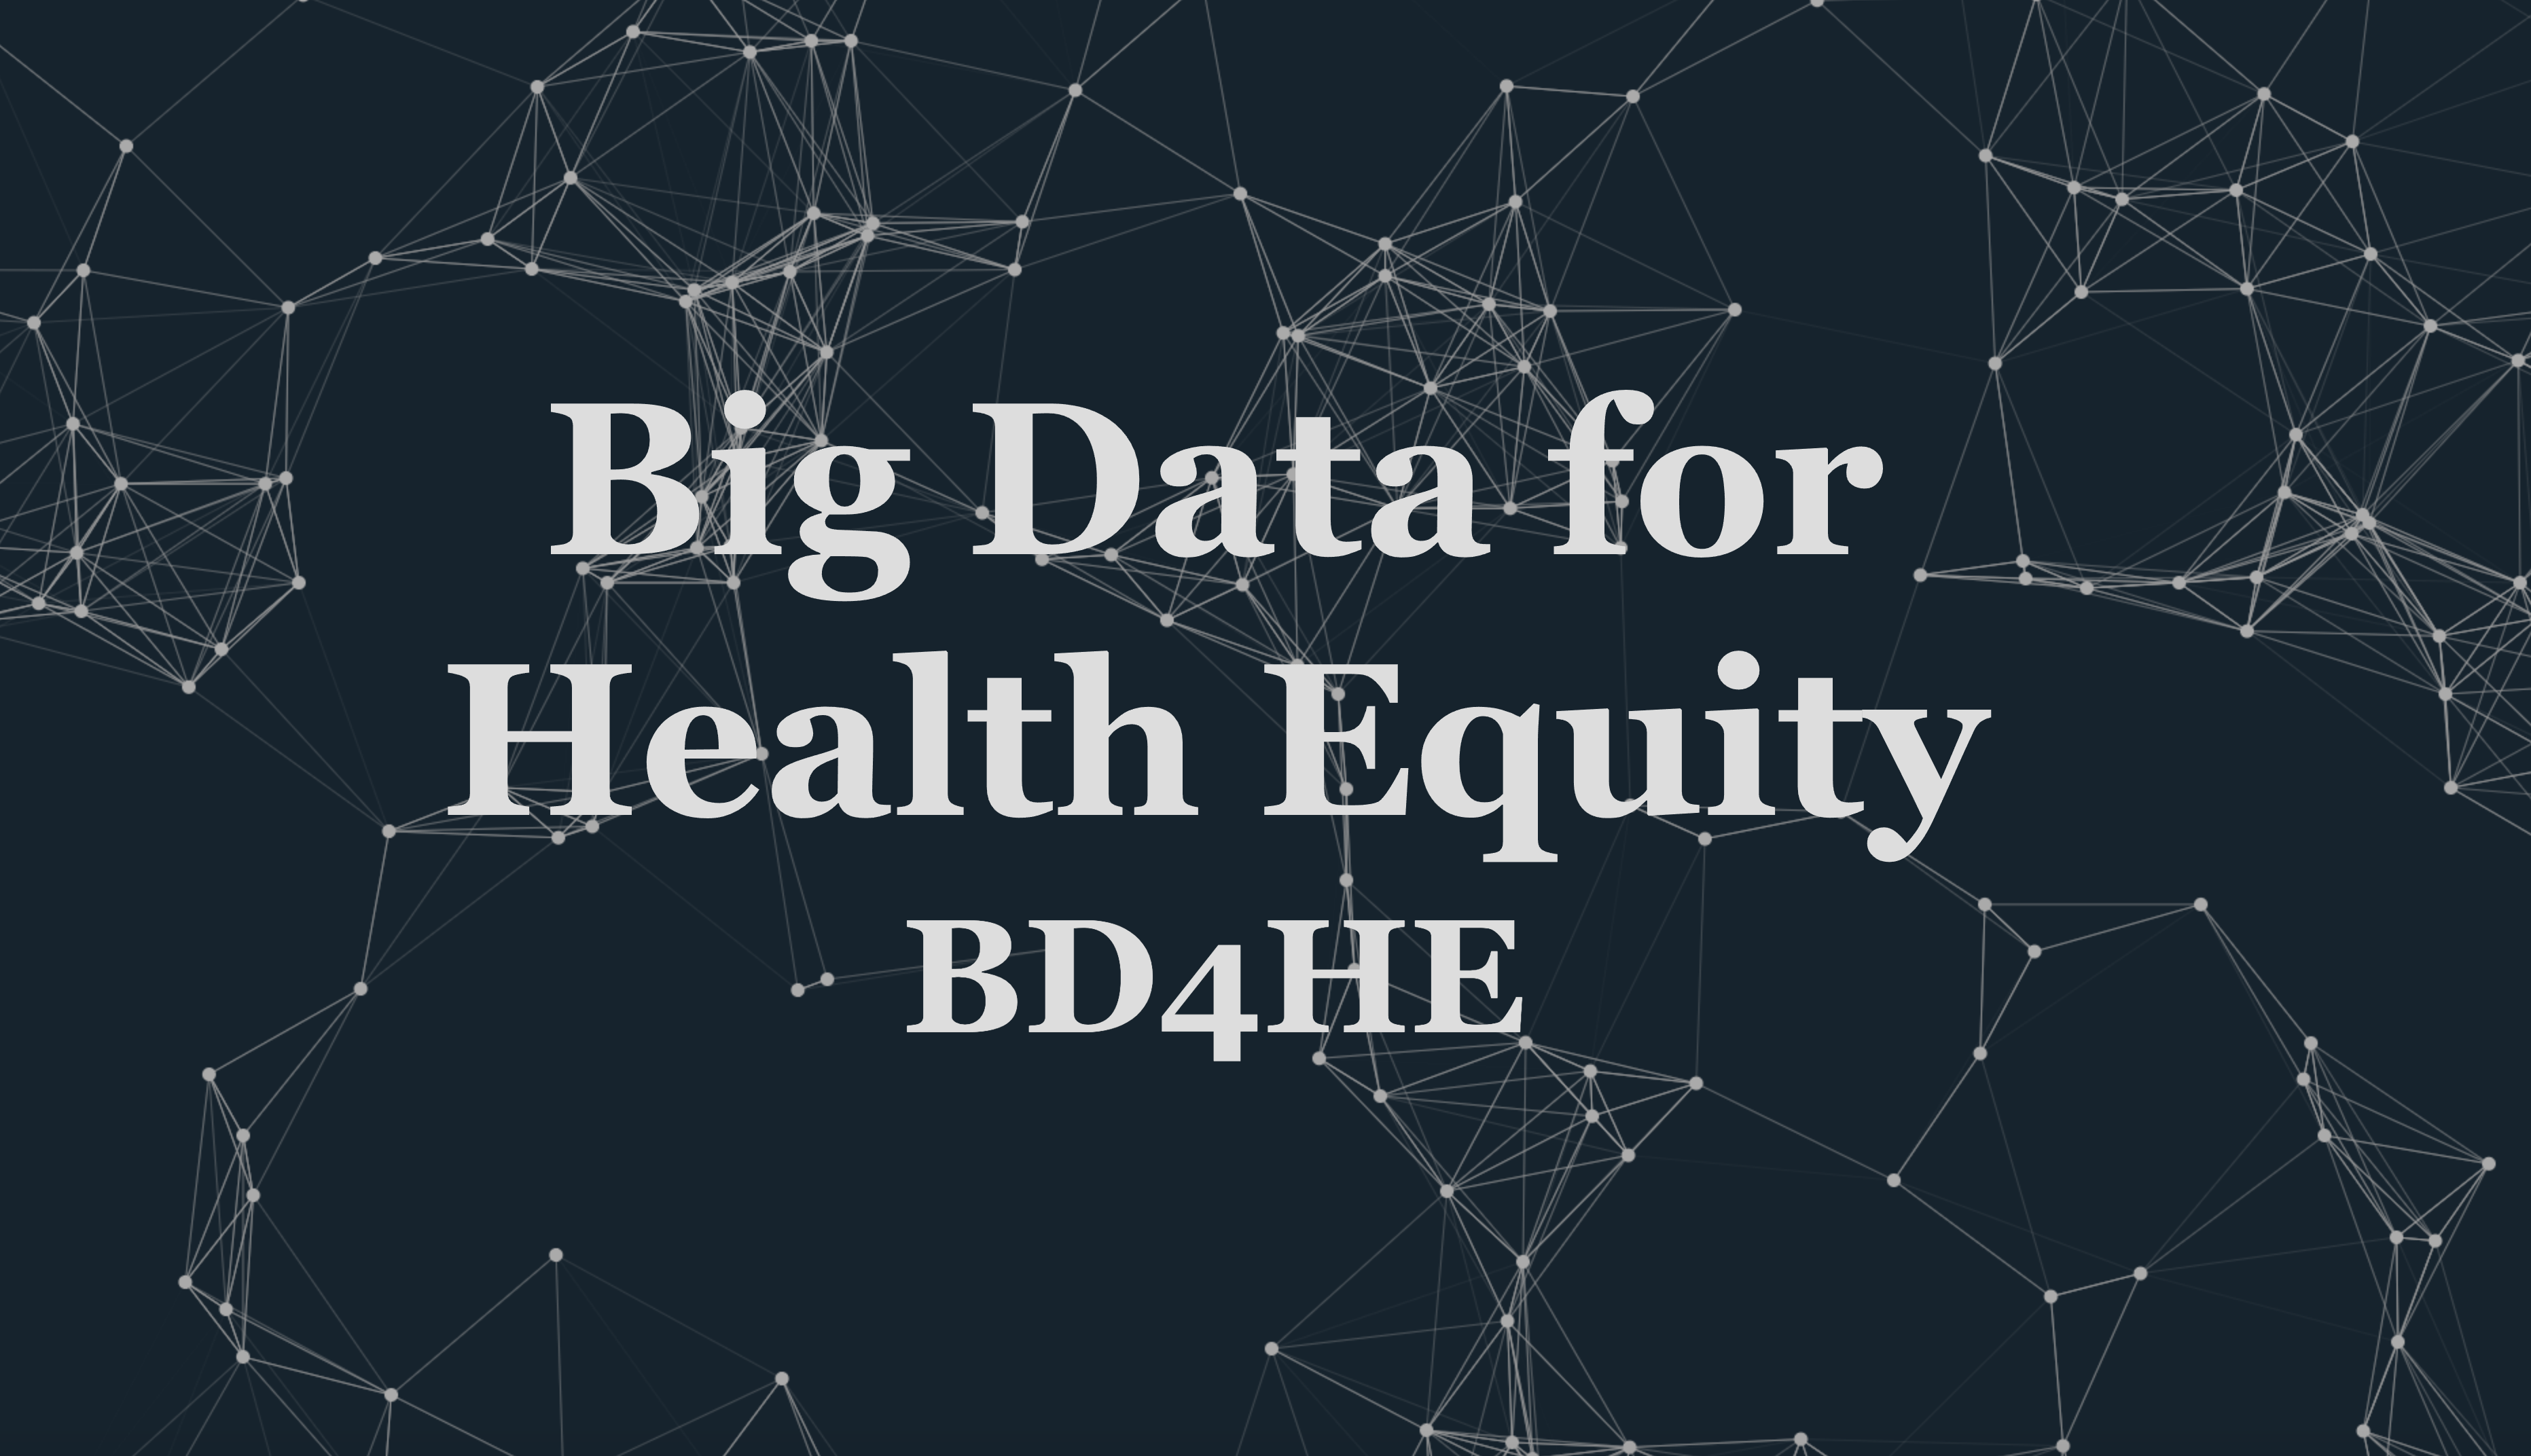 Big Data for Health Equity